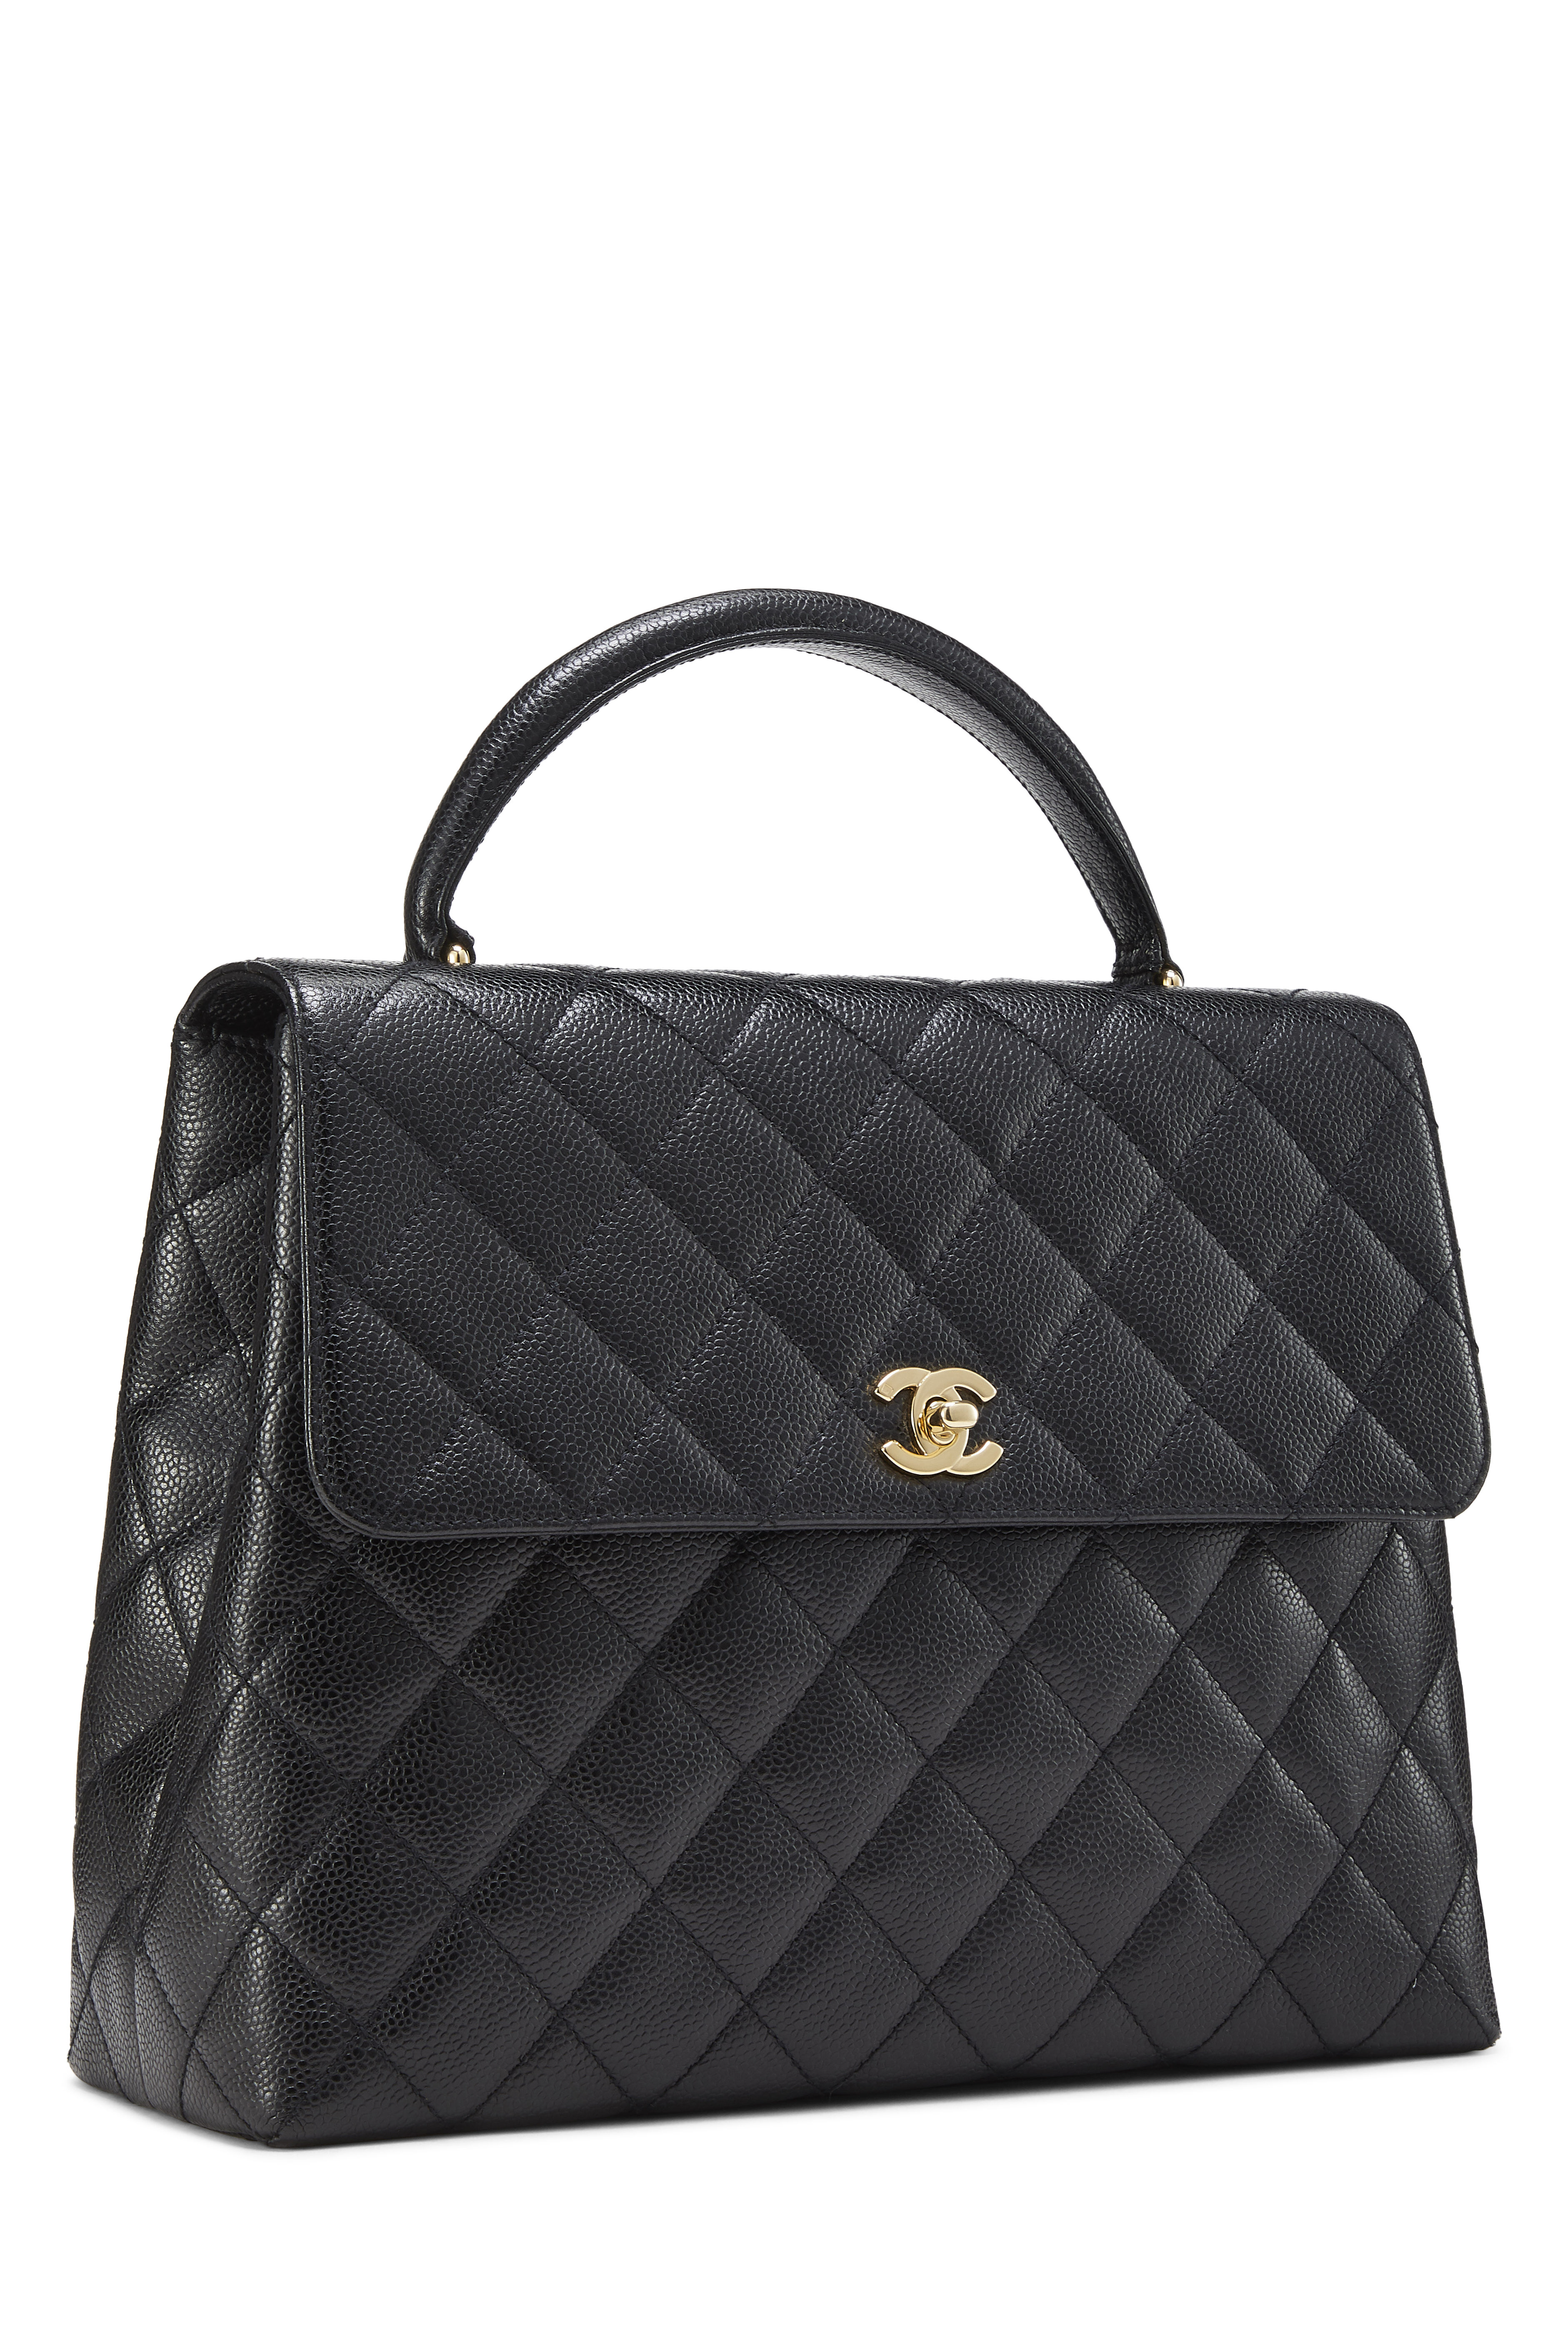 Chanel - Beige Quilted Caviar Kelly